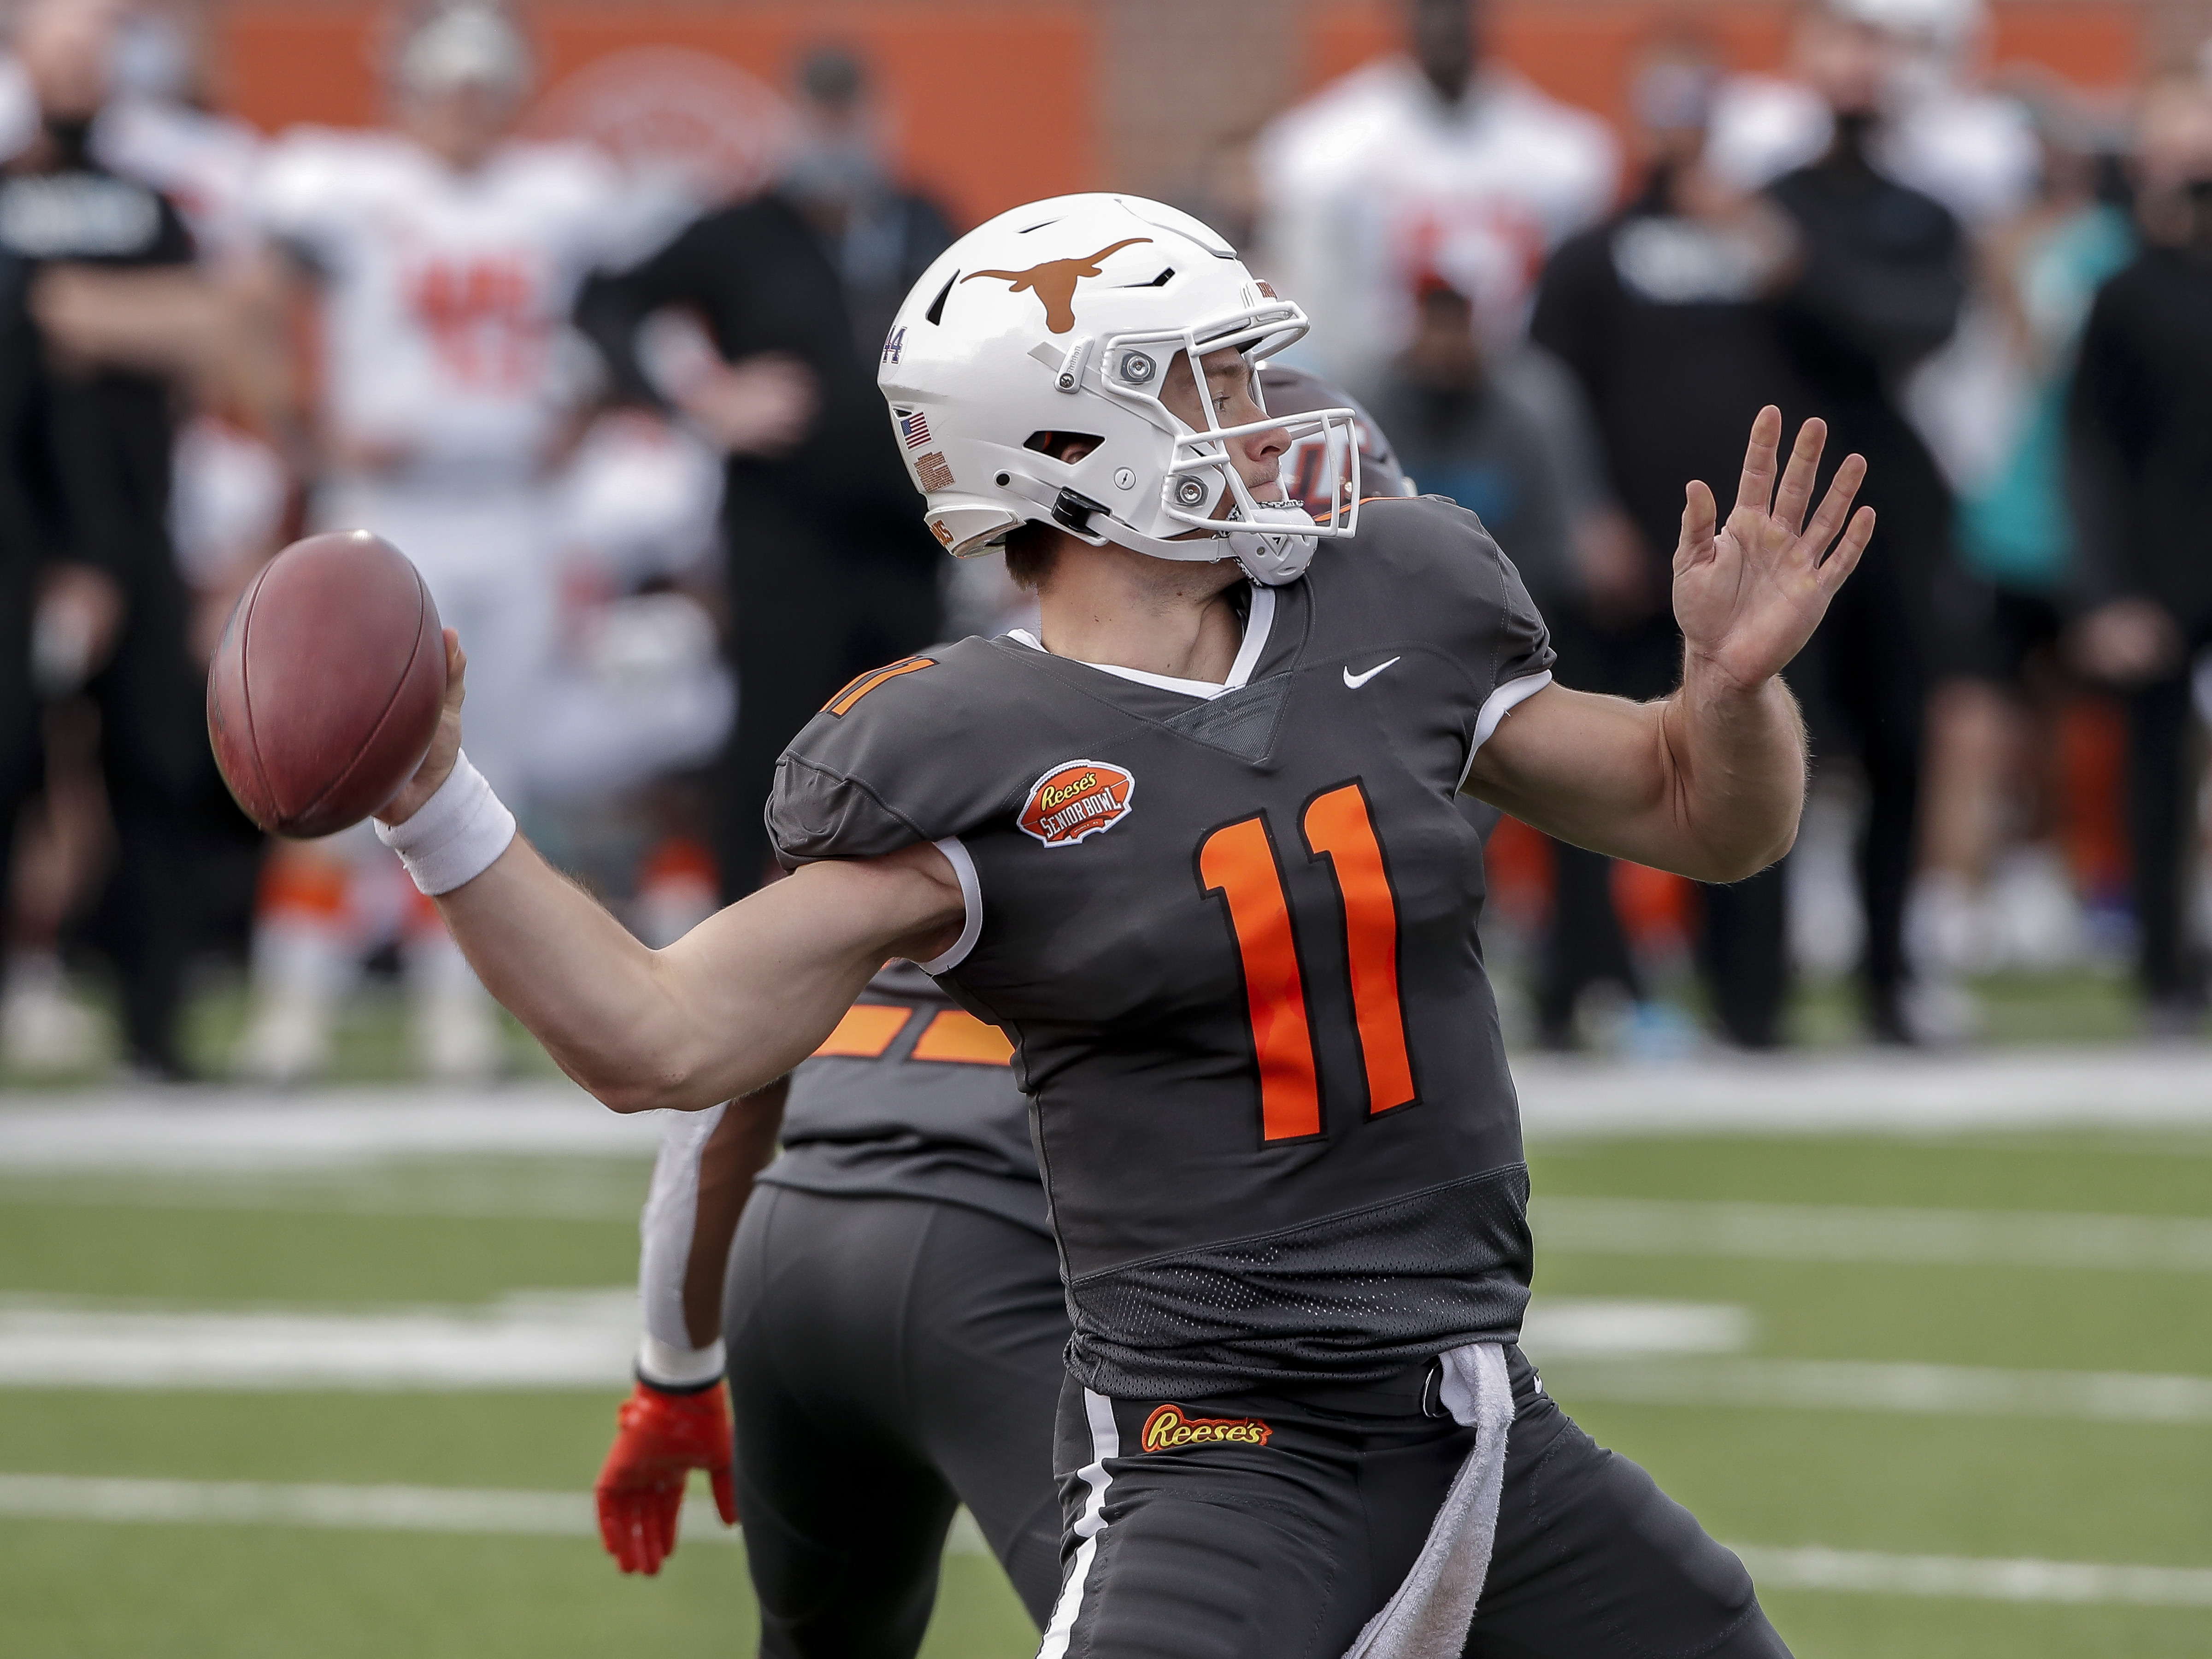 Quarterback Sam Ehlinger #11 from Texas of the National Team on a pass play during the 2021 Resse’s Senior Bowl at Hancock Whitney Stadium on the campus of the University of South Alabama on January 30, 2021 in Mobile, Alabama. The National Team defeated the American Team 27-24.